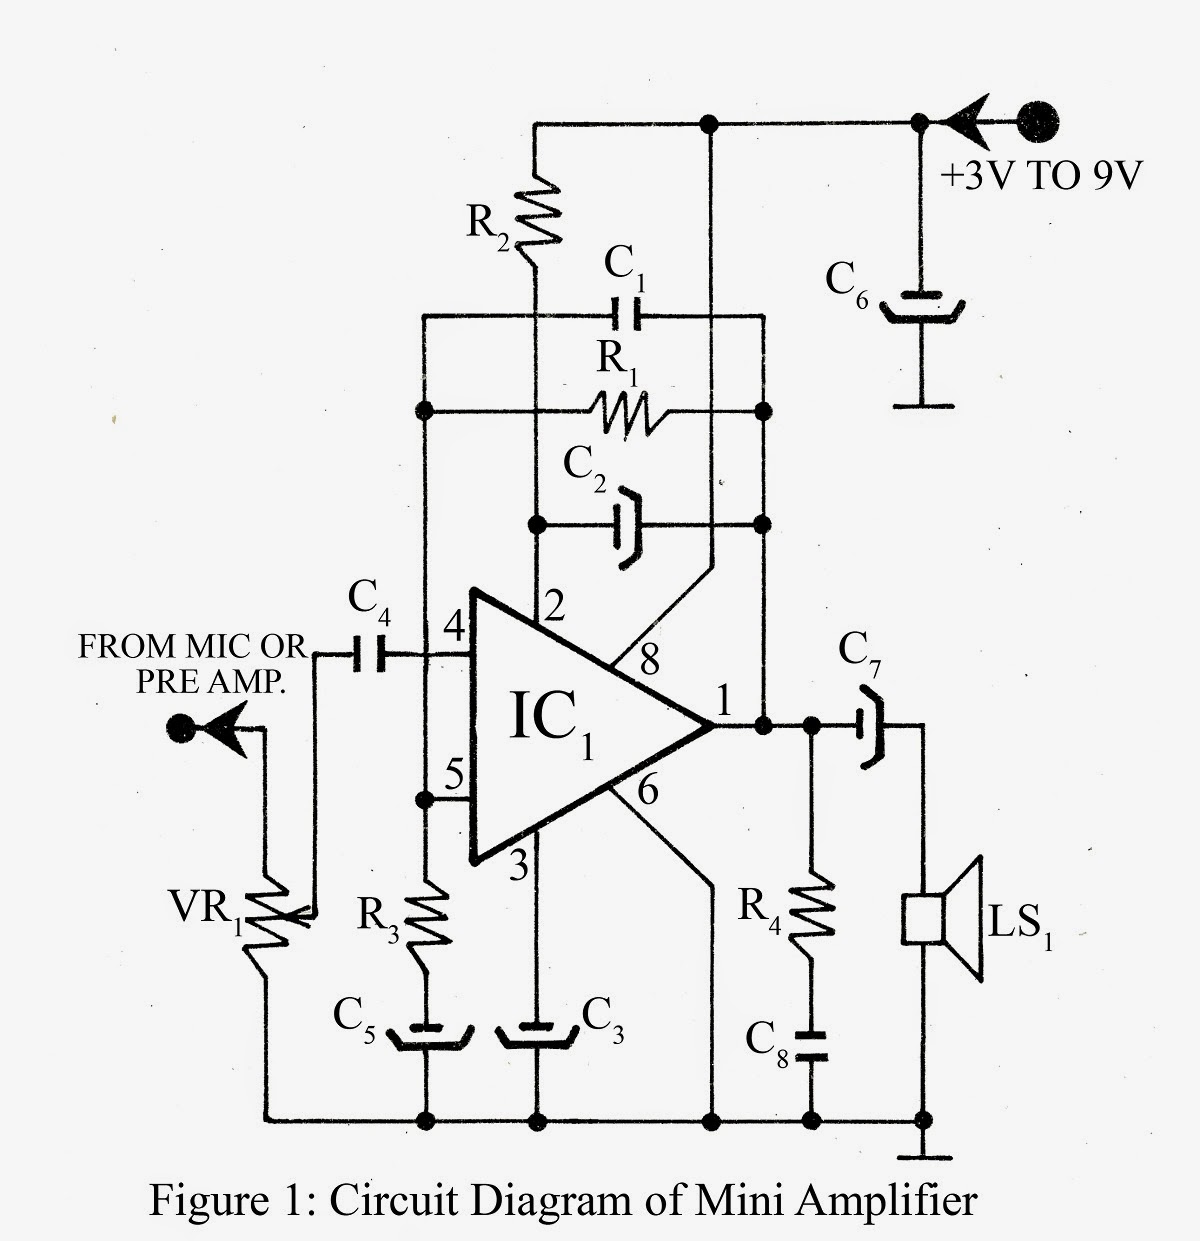  Mini Amplifier Circuit  Diagram Electronic Projects 